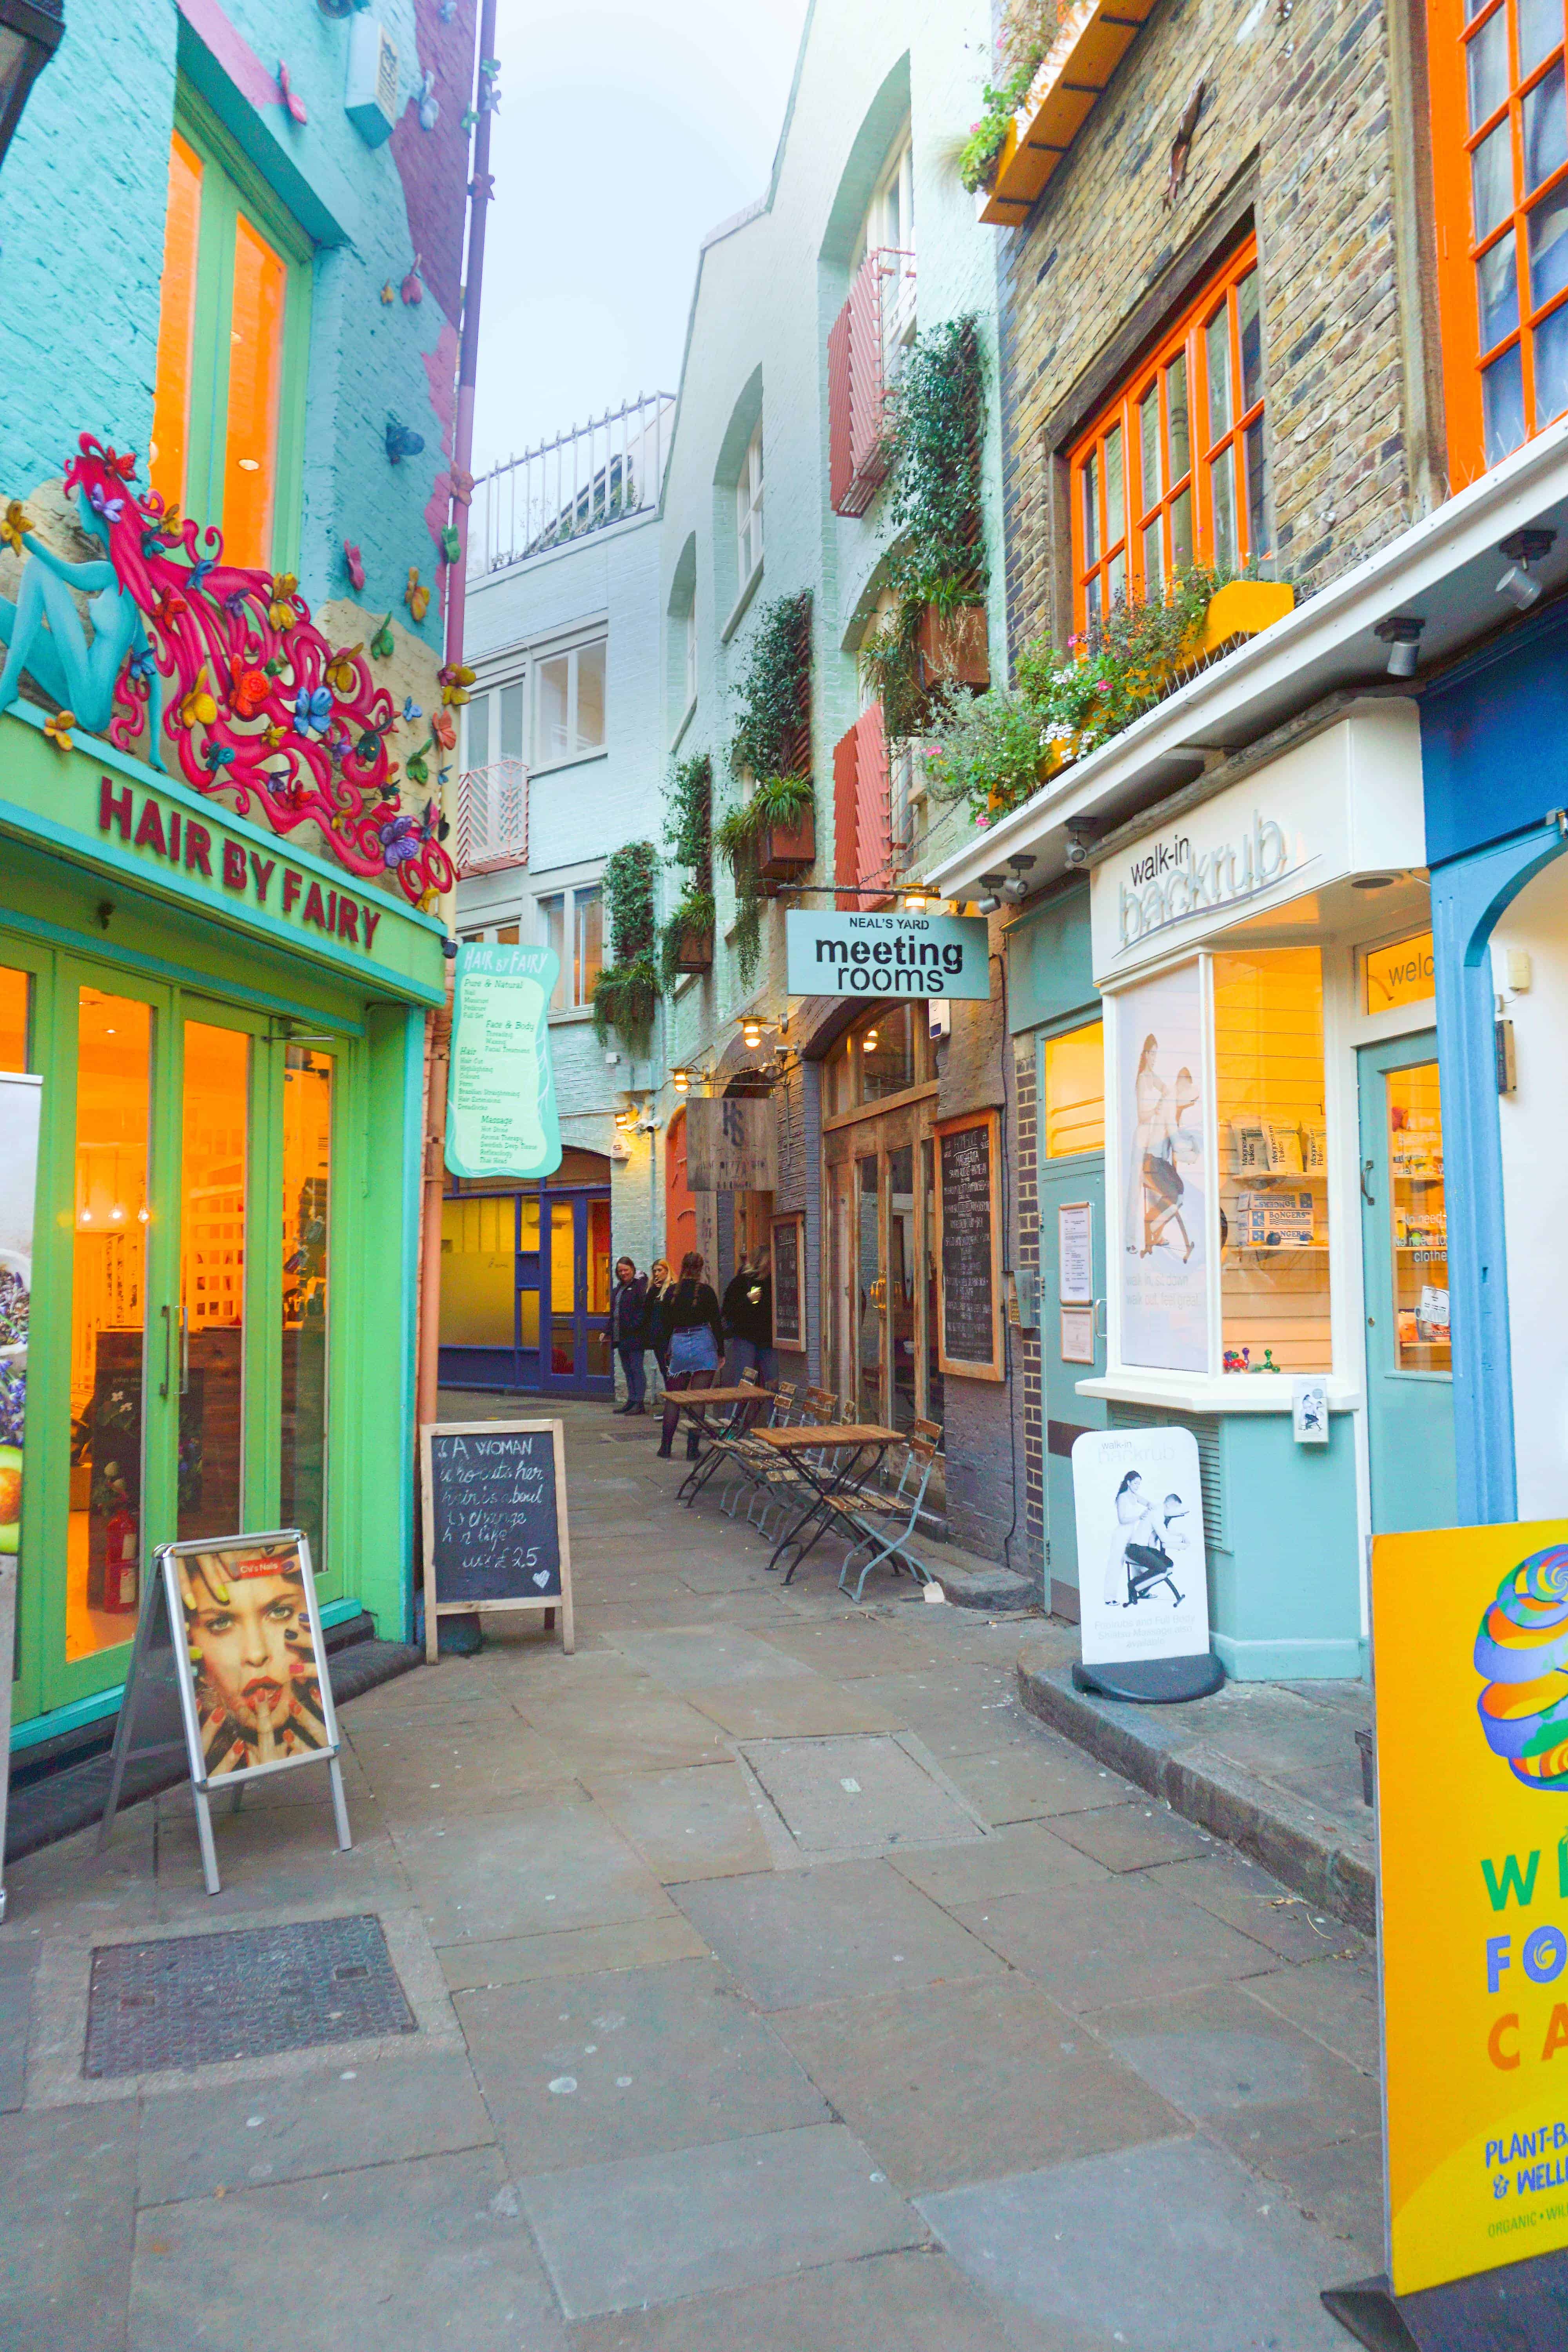 Neal's Yard in Covent Garden is the most unique London street